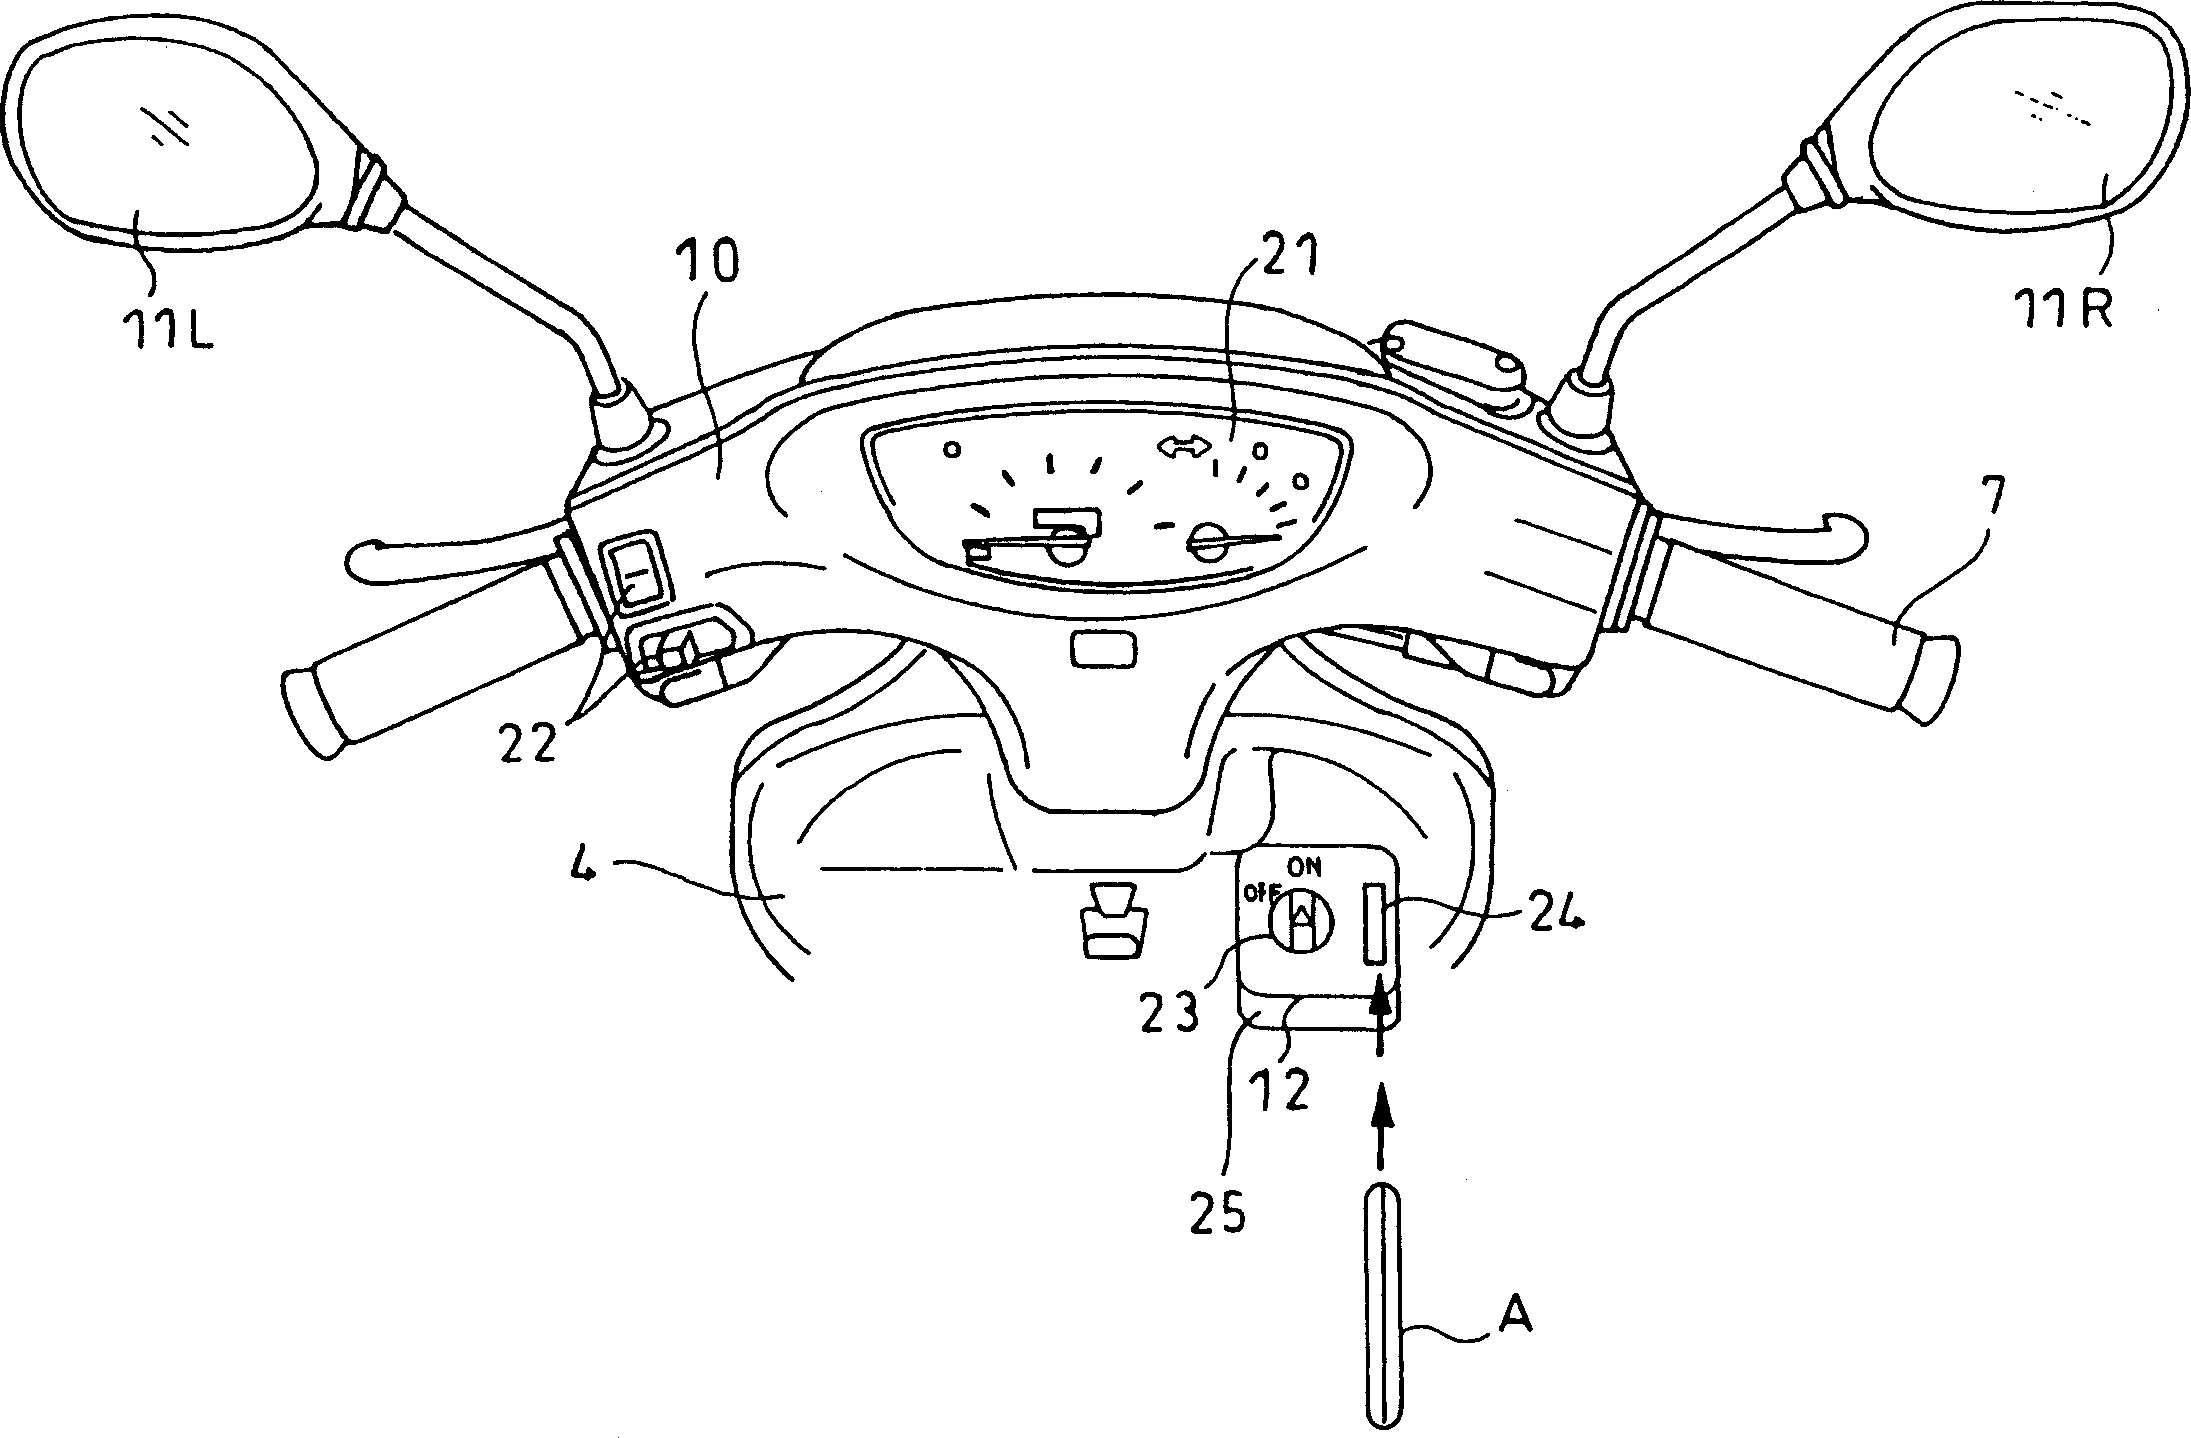 Anti-theft device for matorcycle